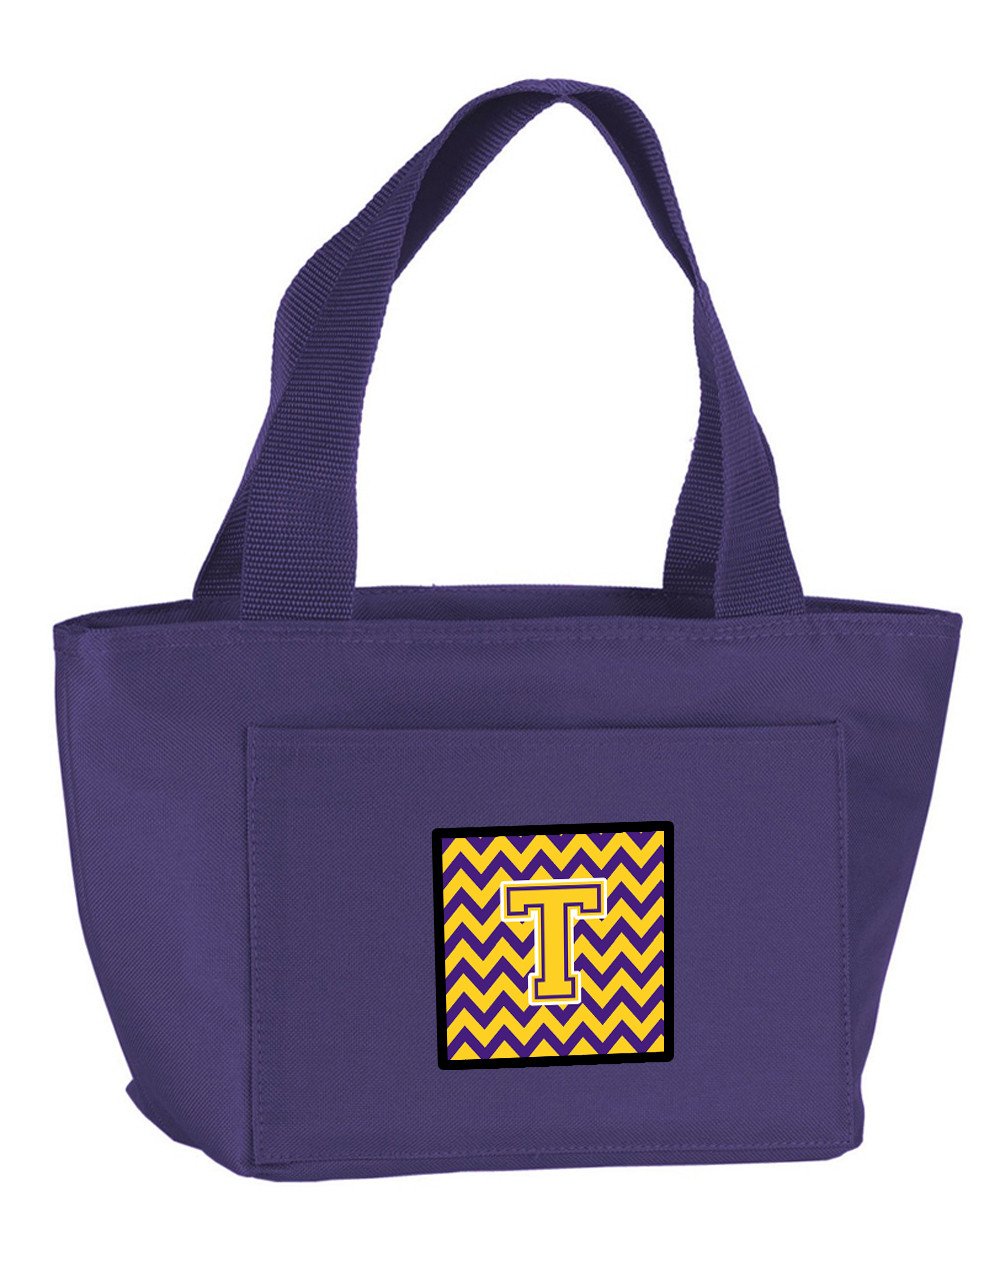 Letter T Chevron Purple and Gold Lunch Bag CJ1041-TPR-8808 by Caroline's Treasures